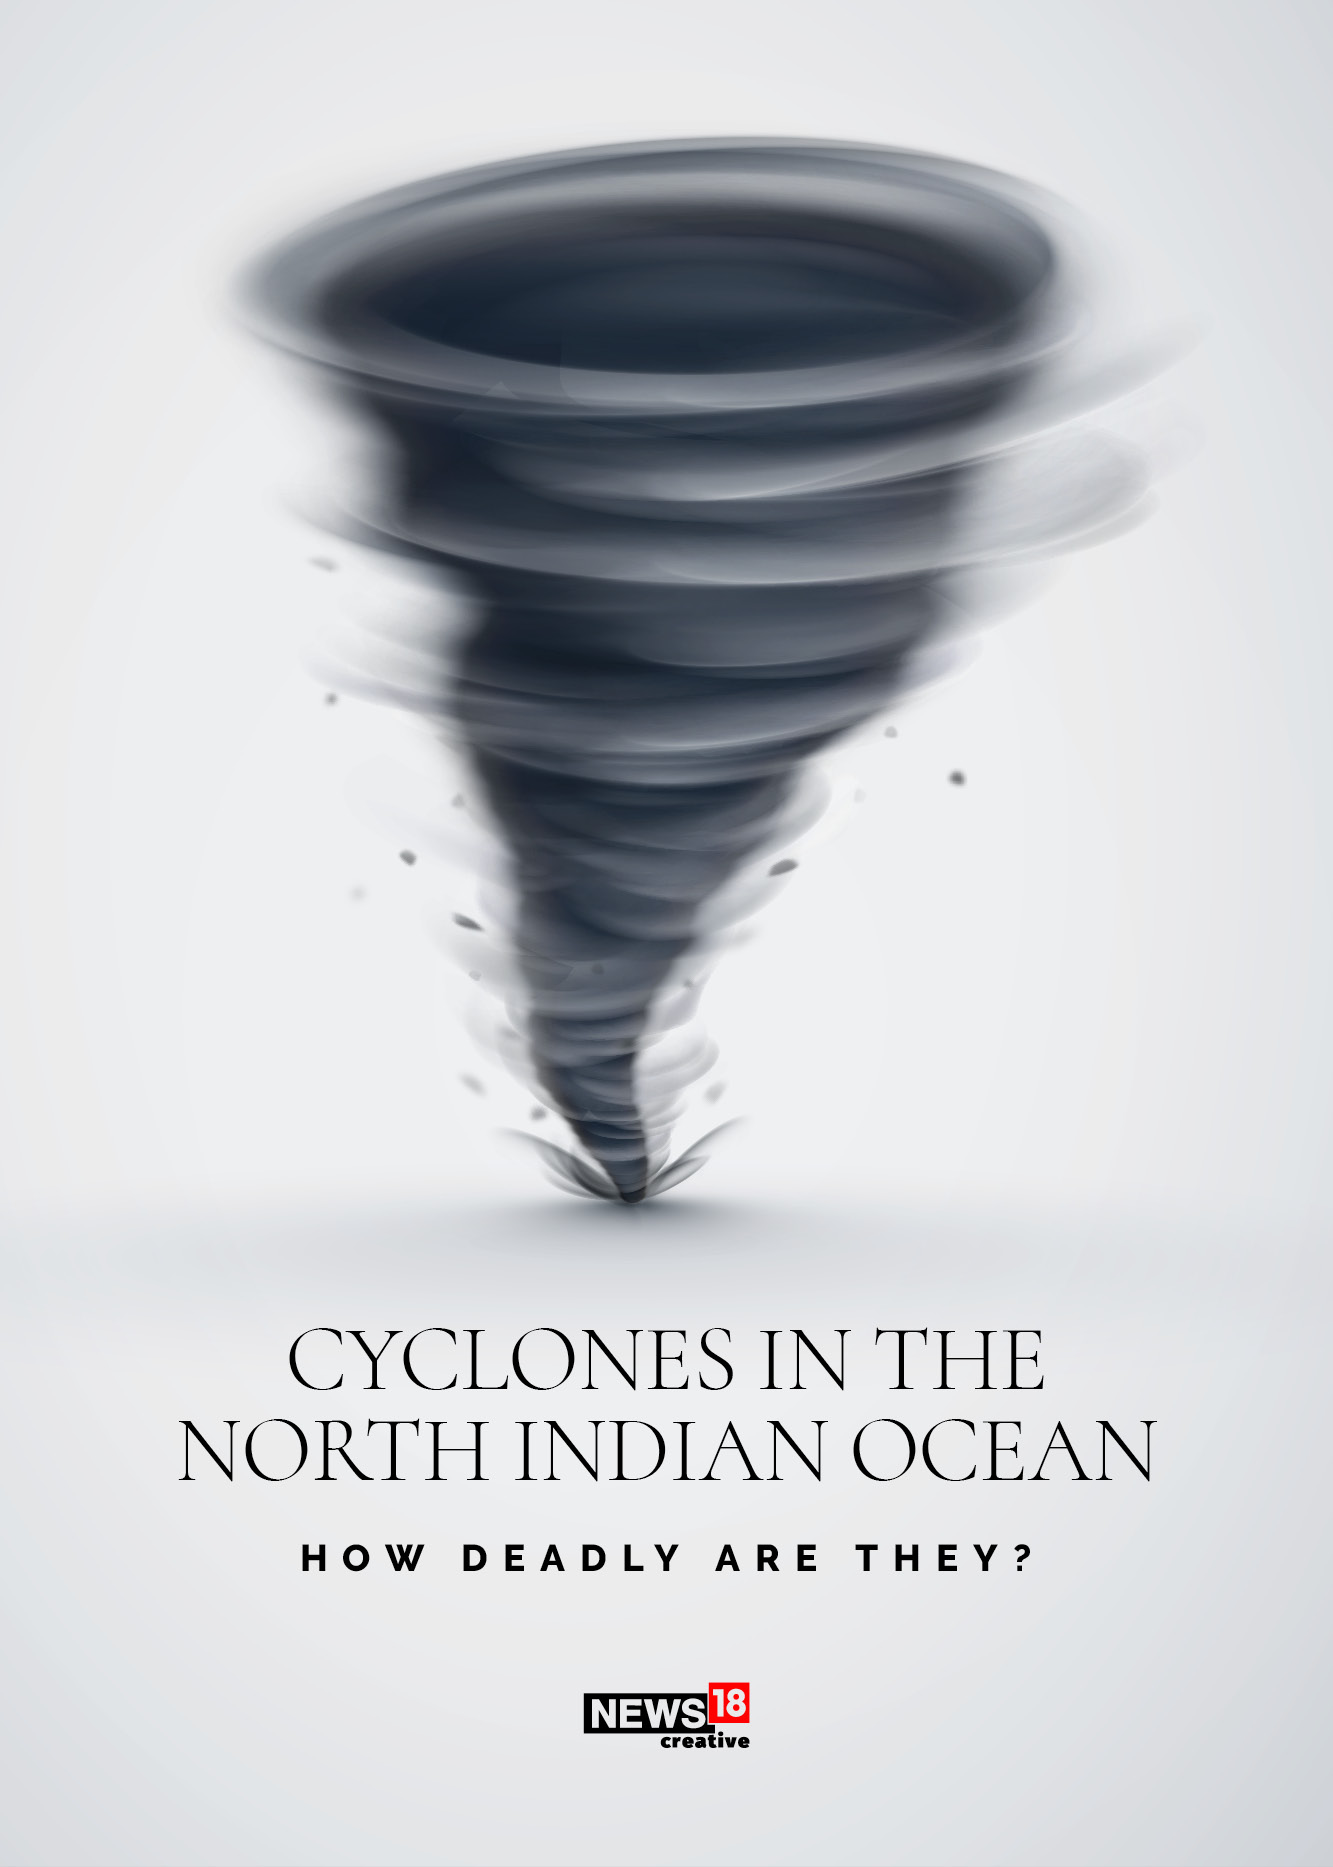 Cyclone Nivar passes: Which were the deadliest cyclones in the region?